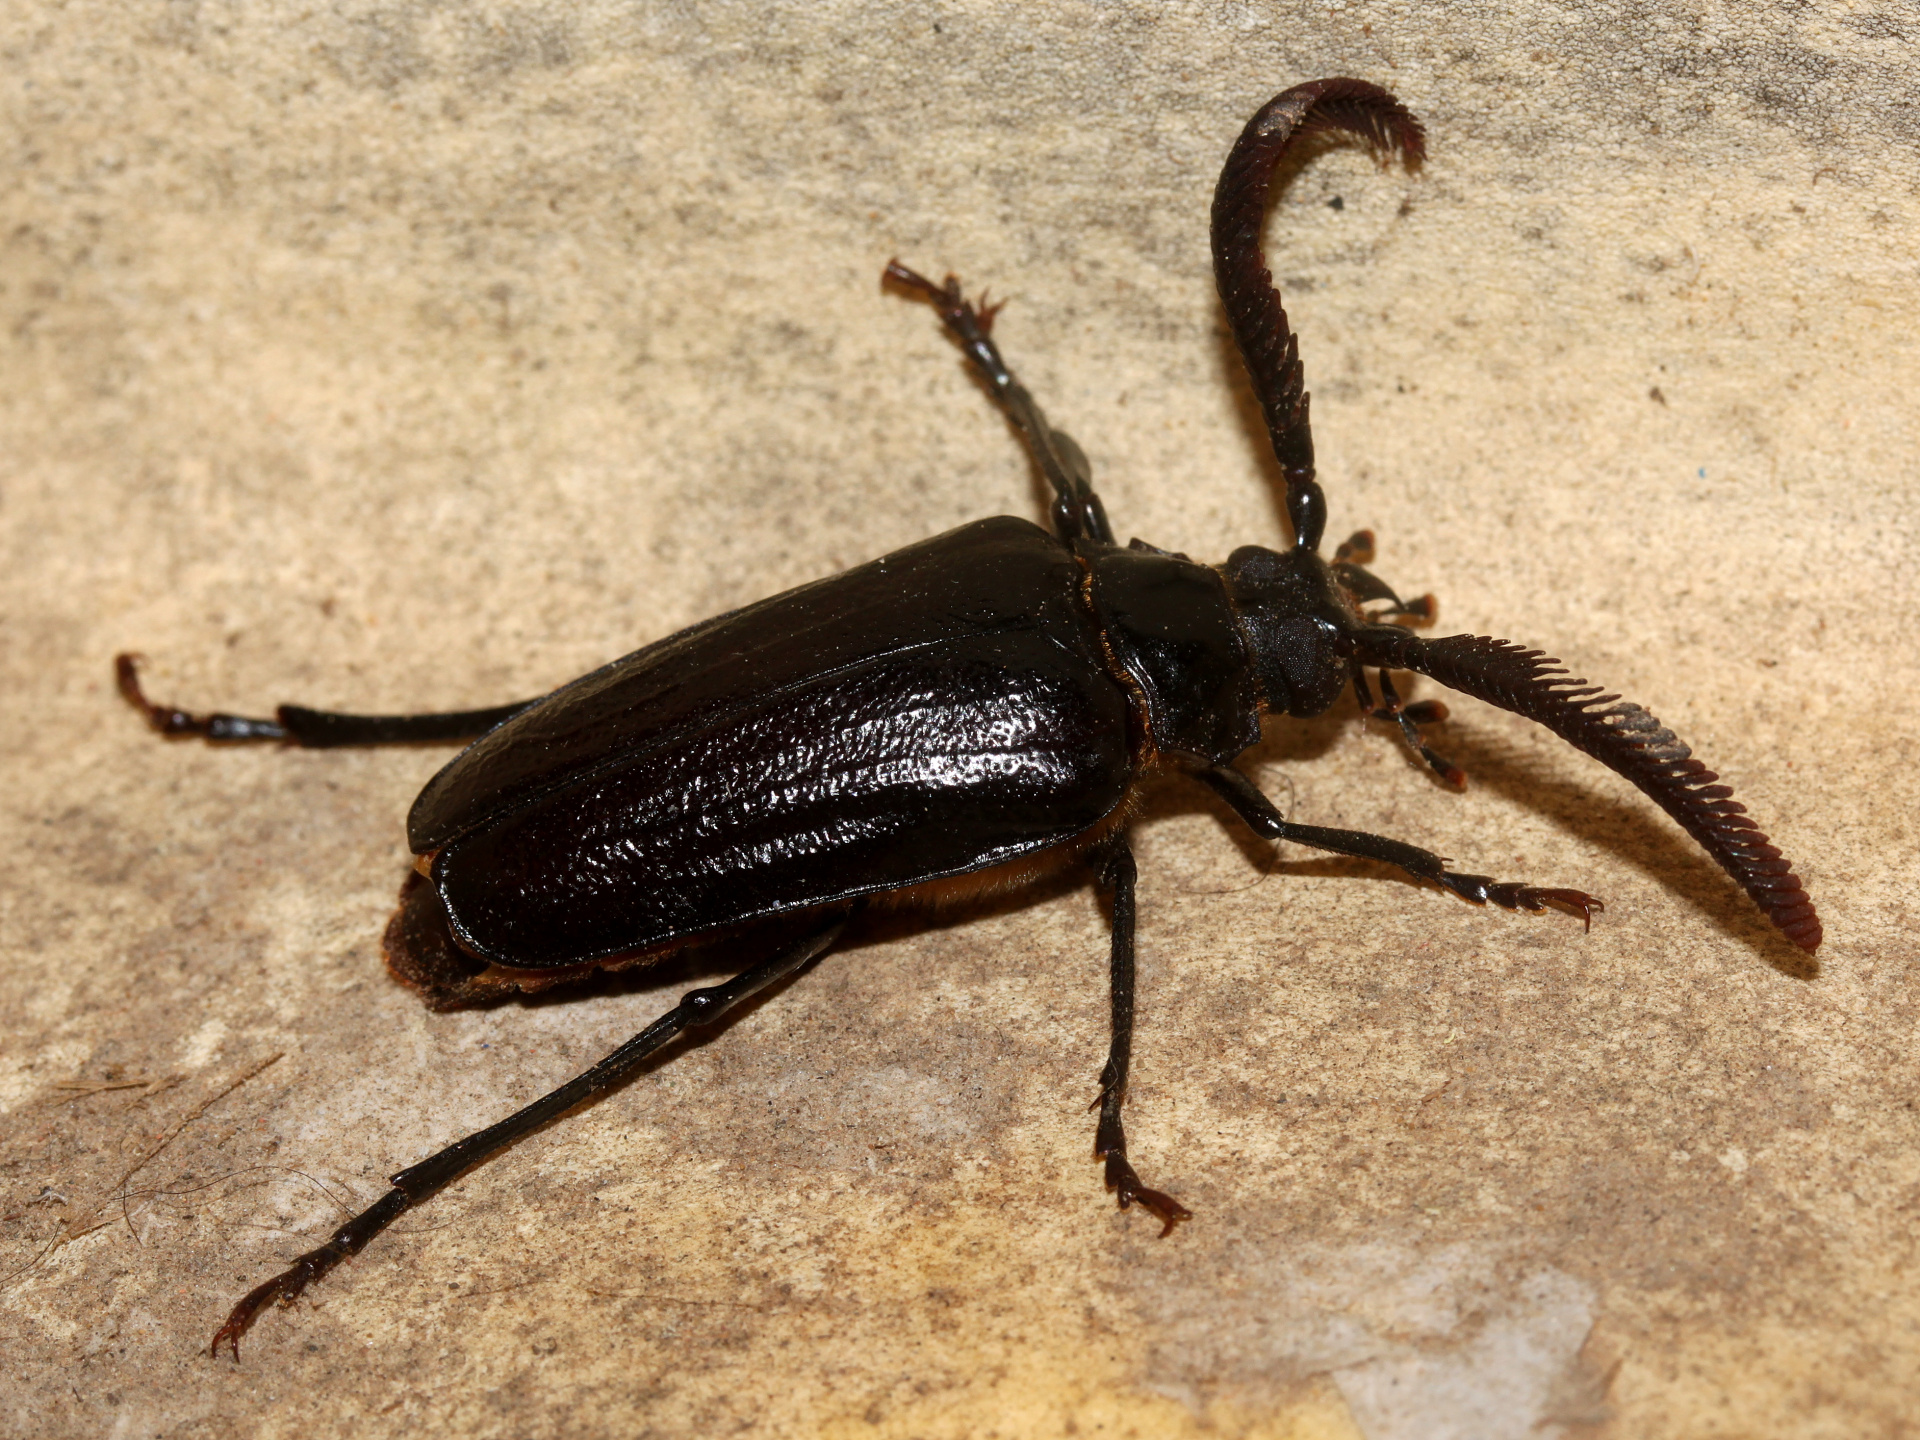 Prionus imbricornis (Travels » US Trip 3: The Roads Not Taken » Animals » Insects » Beetles)